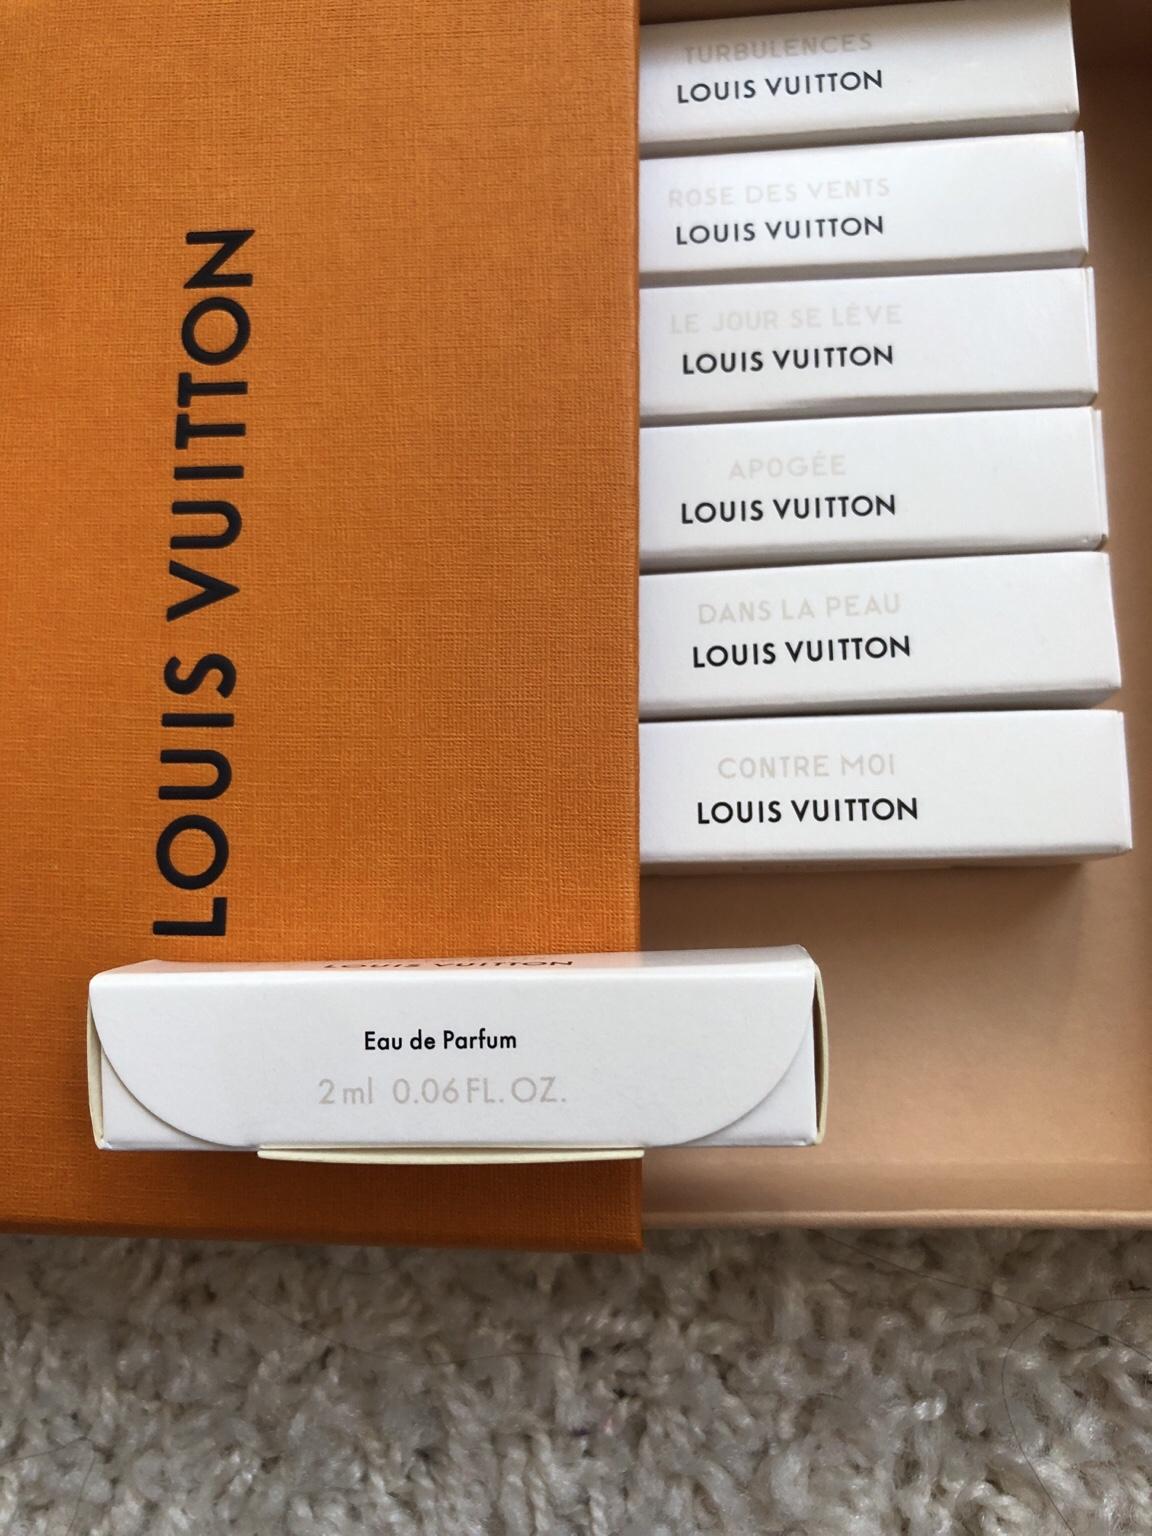 Louis Vuitton perfume samples, new unopened. in W13 Ealing for £45.00 for  sale